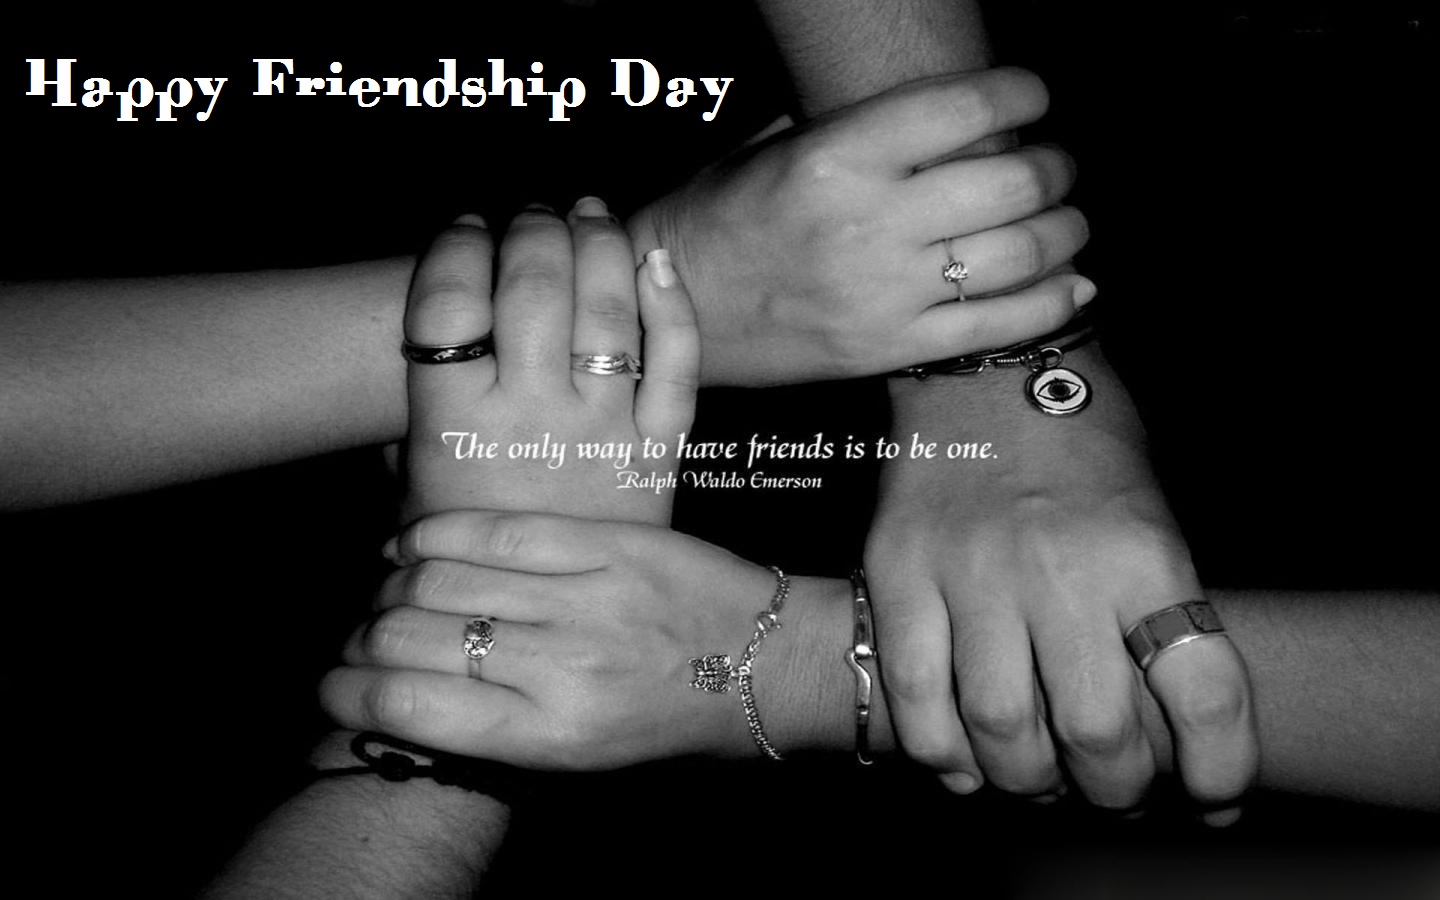 Friendship Day images | Happy Friendship Day Special | Page 5